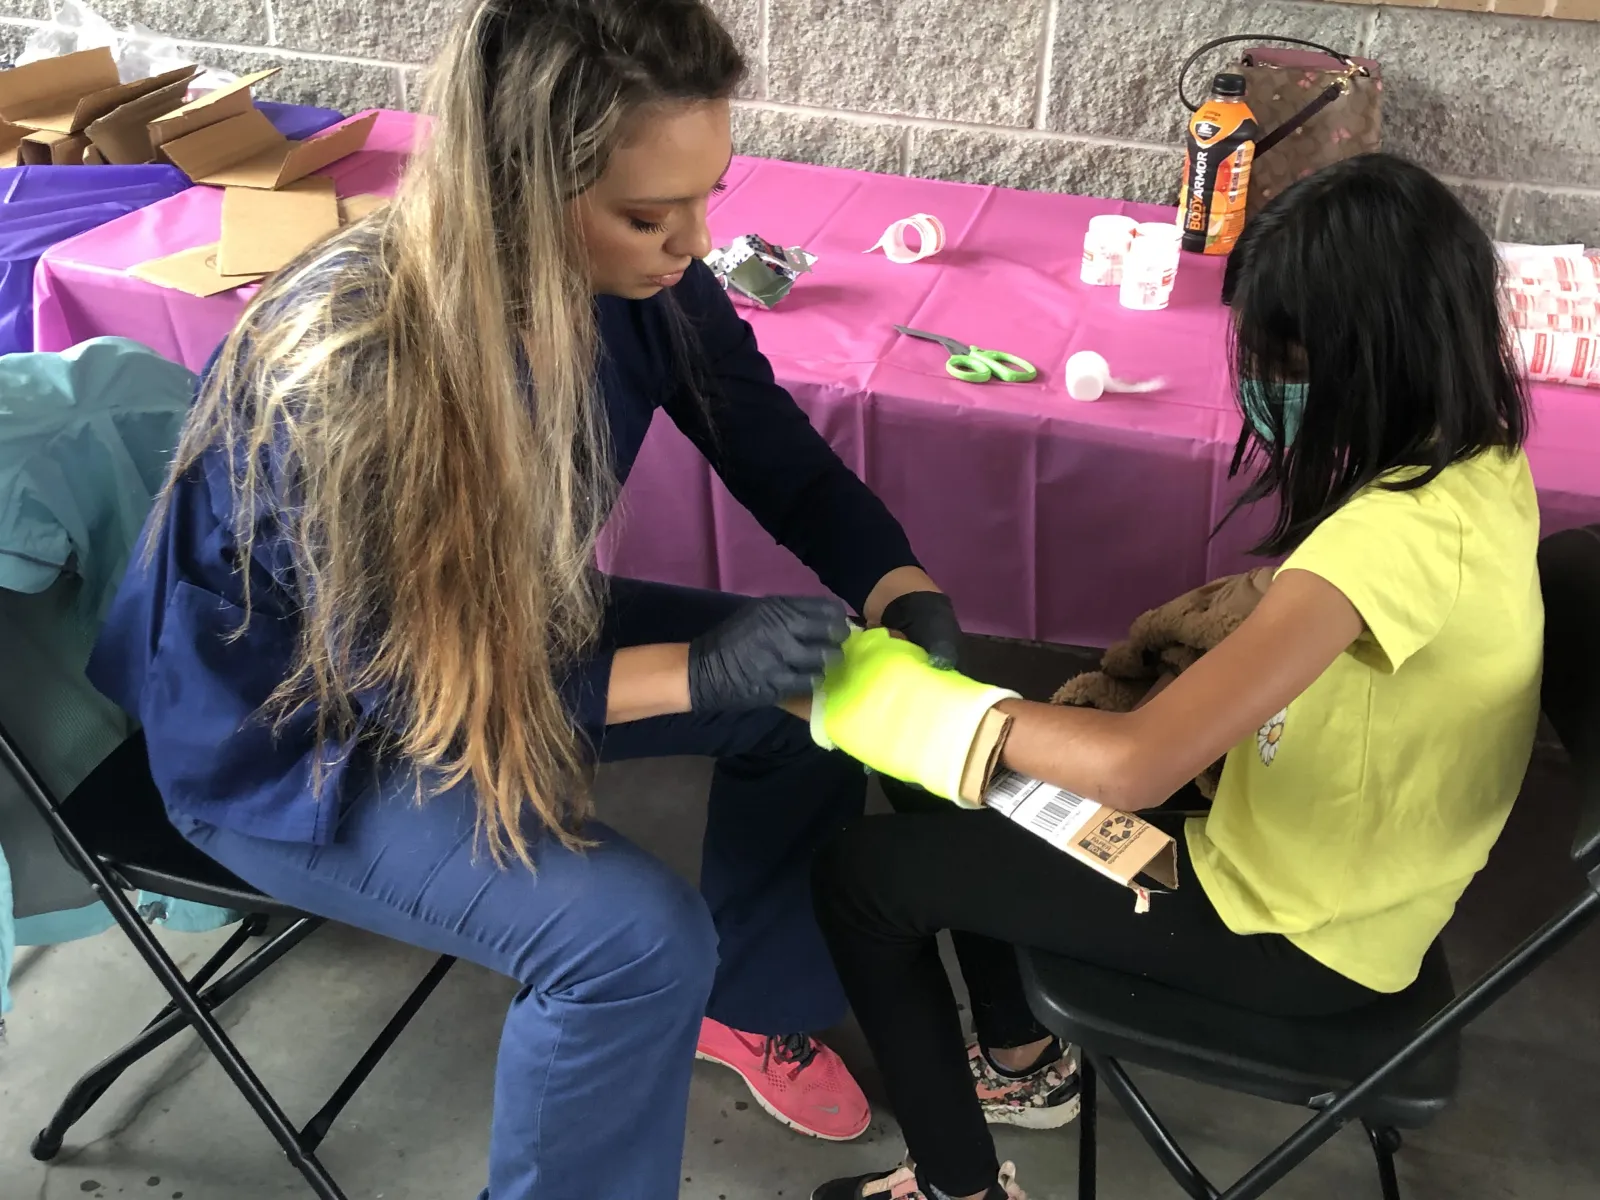 Taylor Brown, a medical assistant, puts a cast on a young female patient.